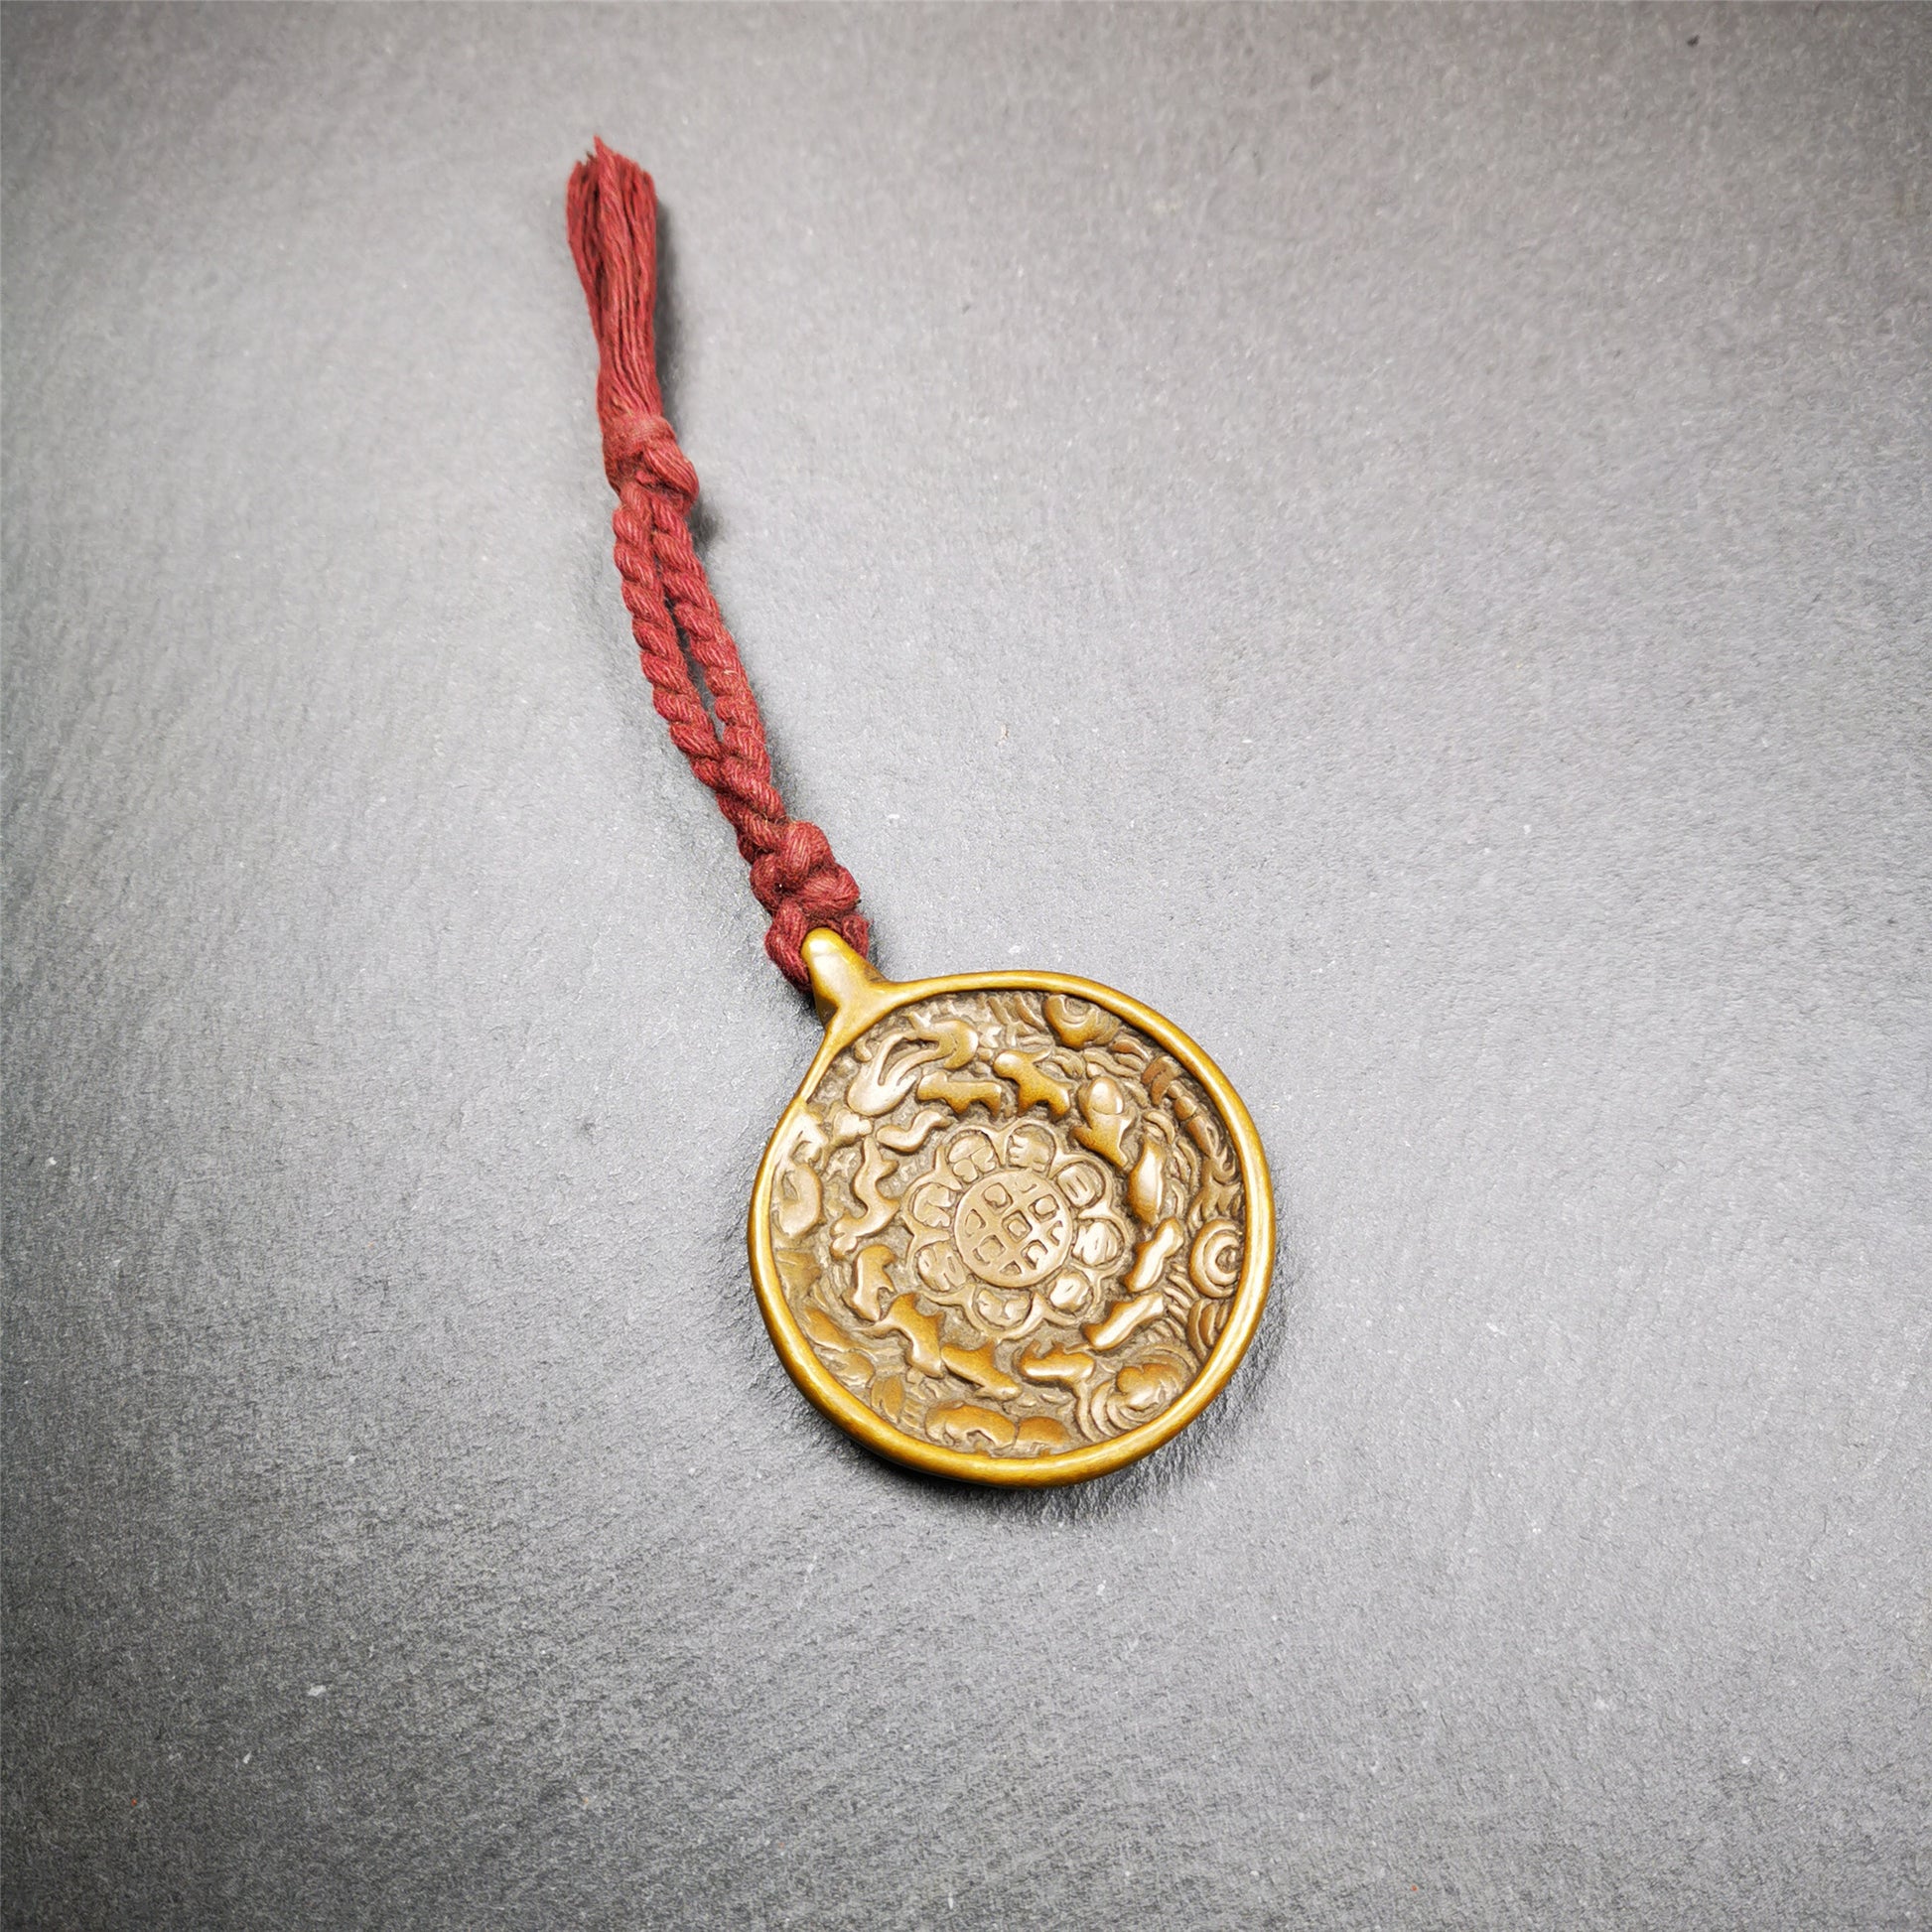 This amulet was collected in Baiyu County Tibet,about 30 years old. It's a Astrology Protective Amulet Pendant,made of red copper. The pattern is Tibetan Budhist Protective Amulet Pendant - SIPAHO